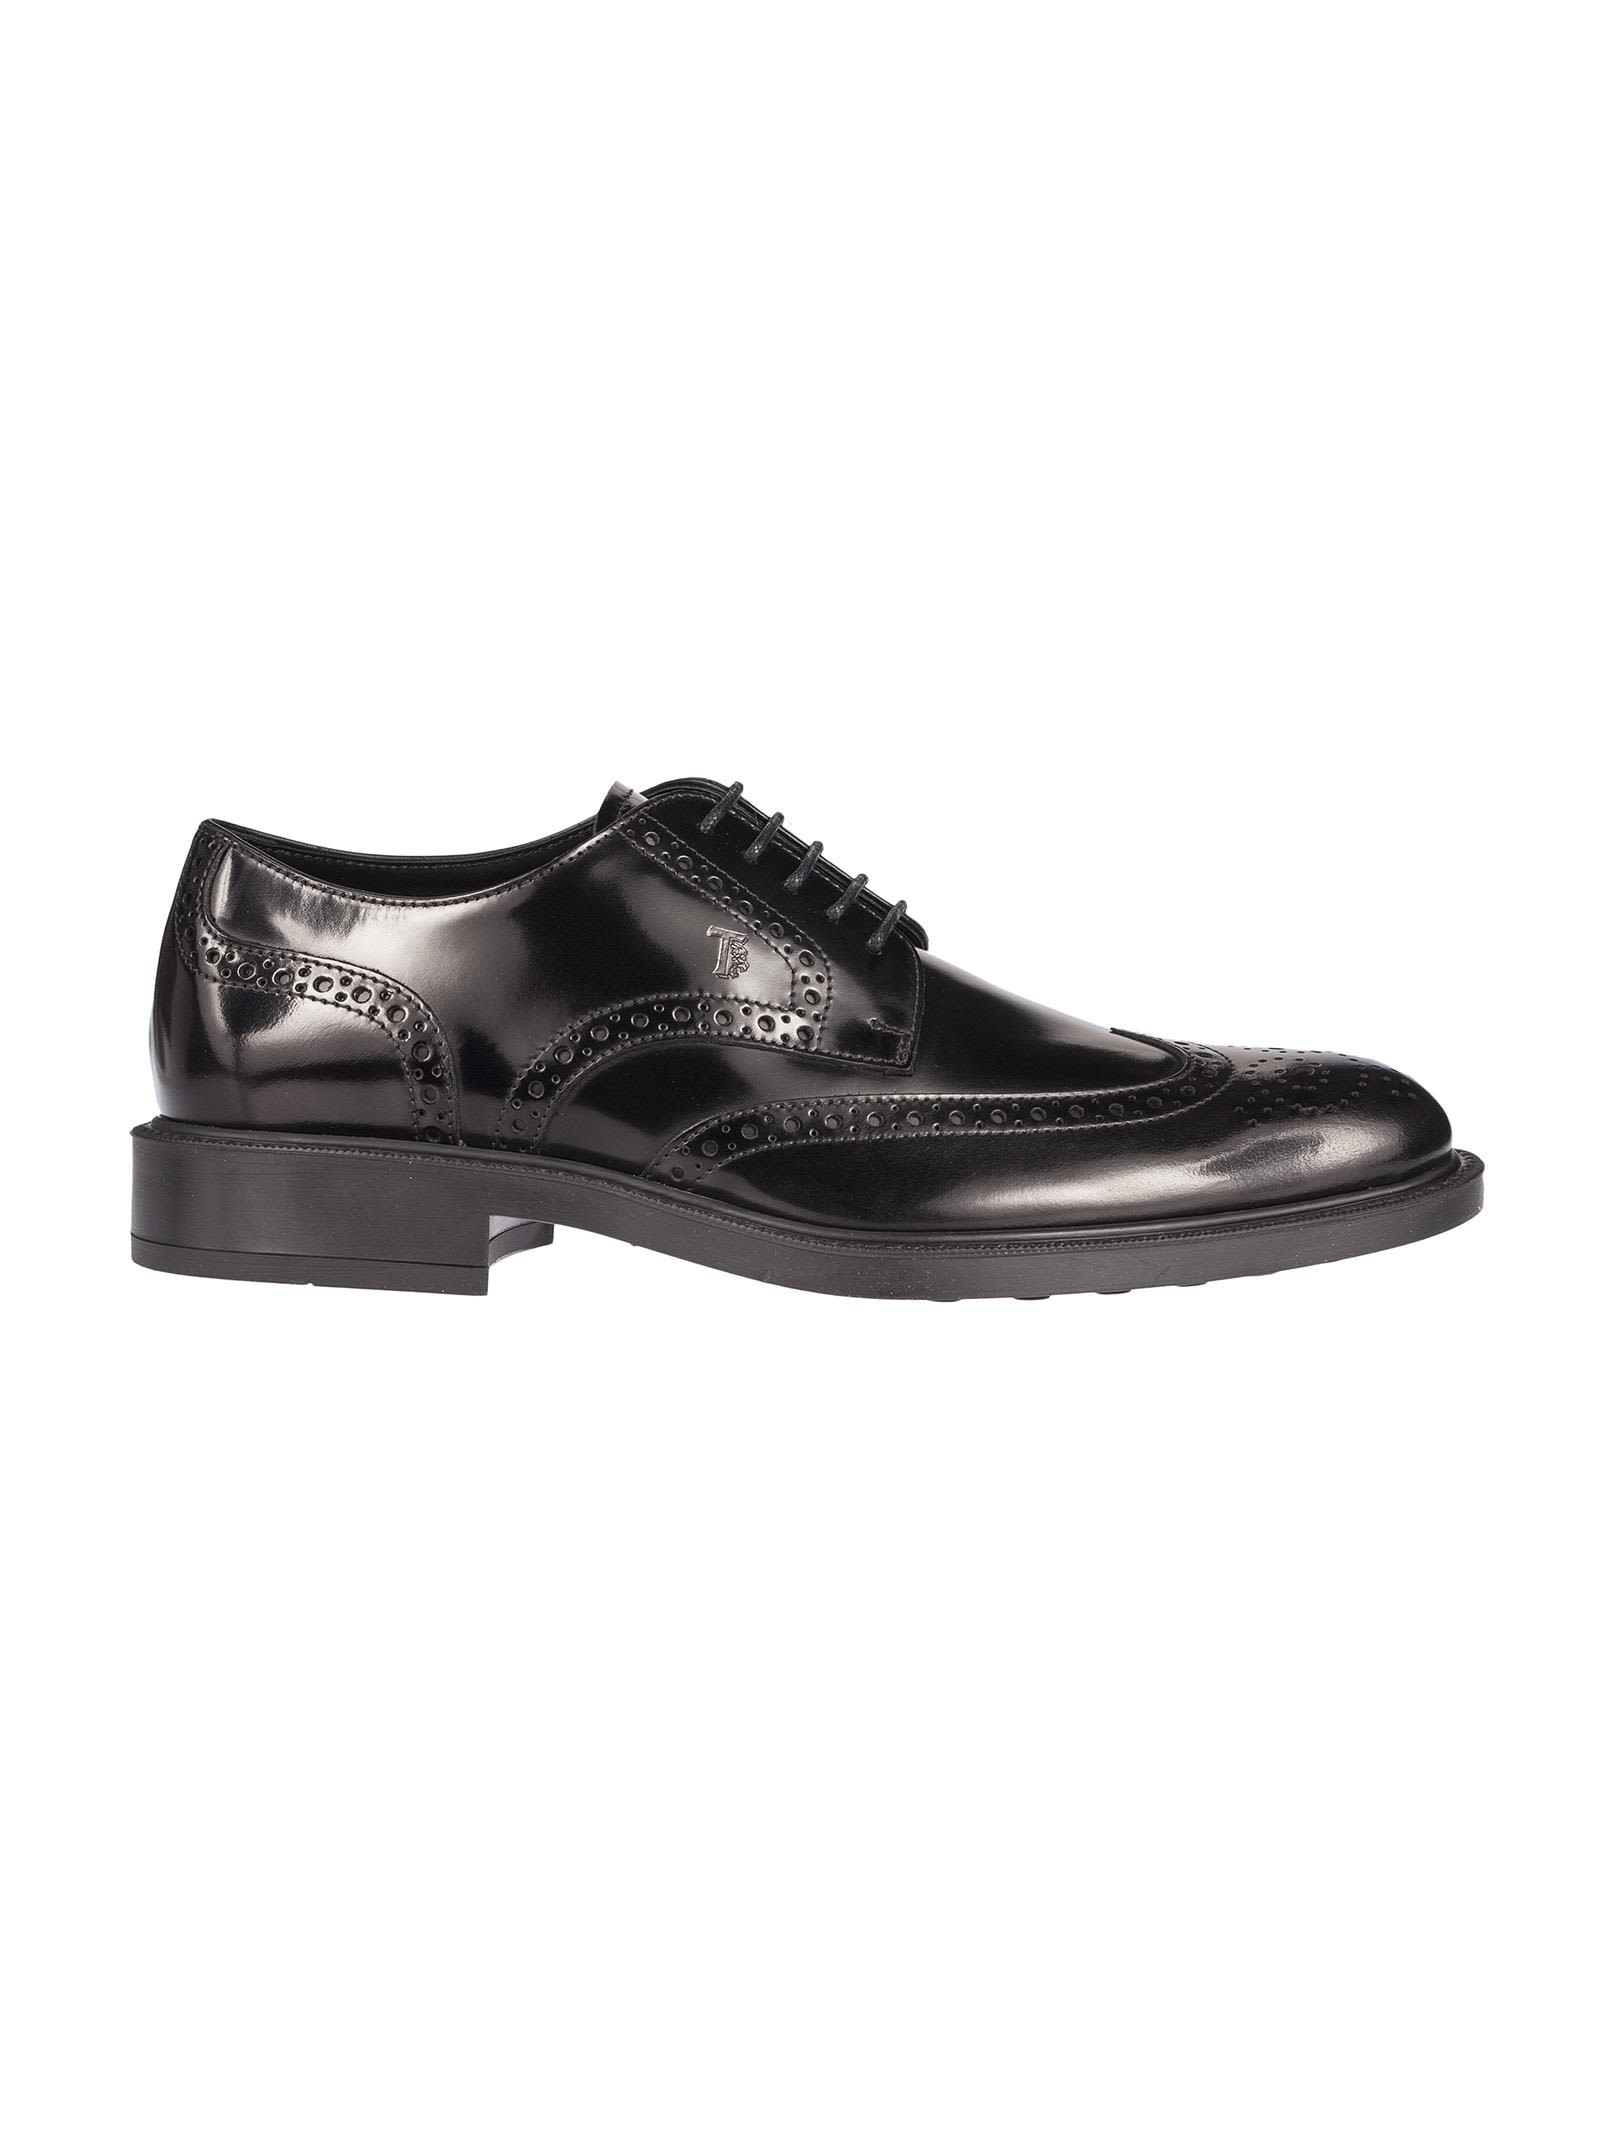 TOD'S Black Leather Lace-Up Wingtip Oxfords | ModeSens